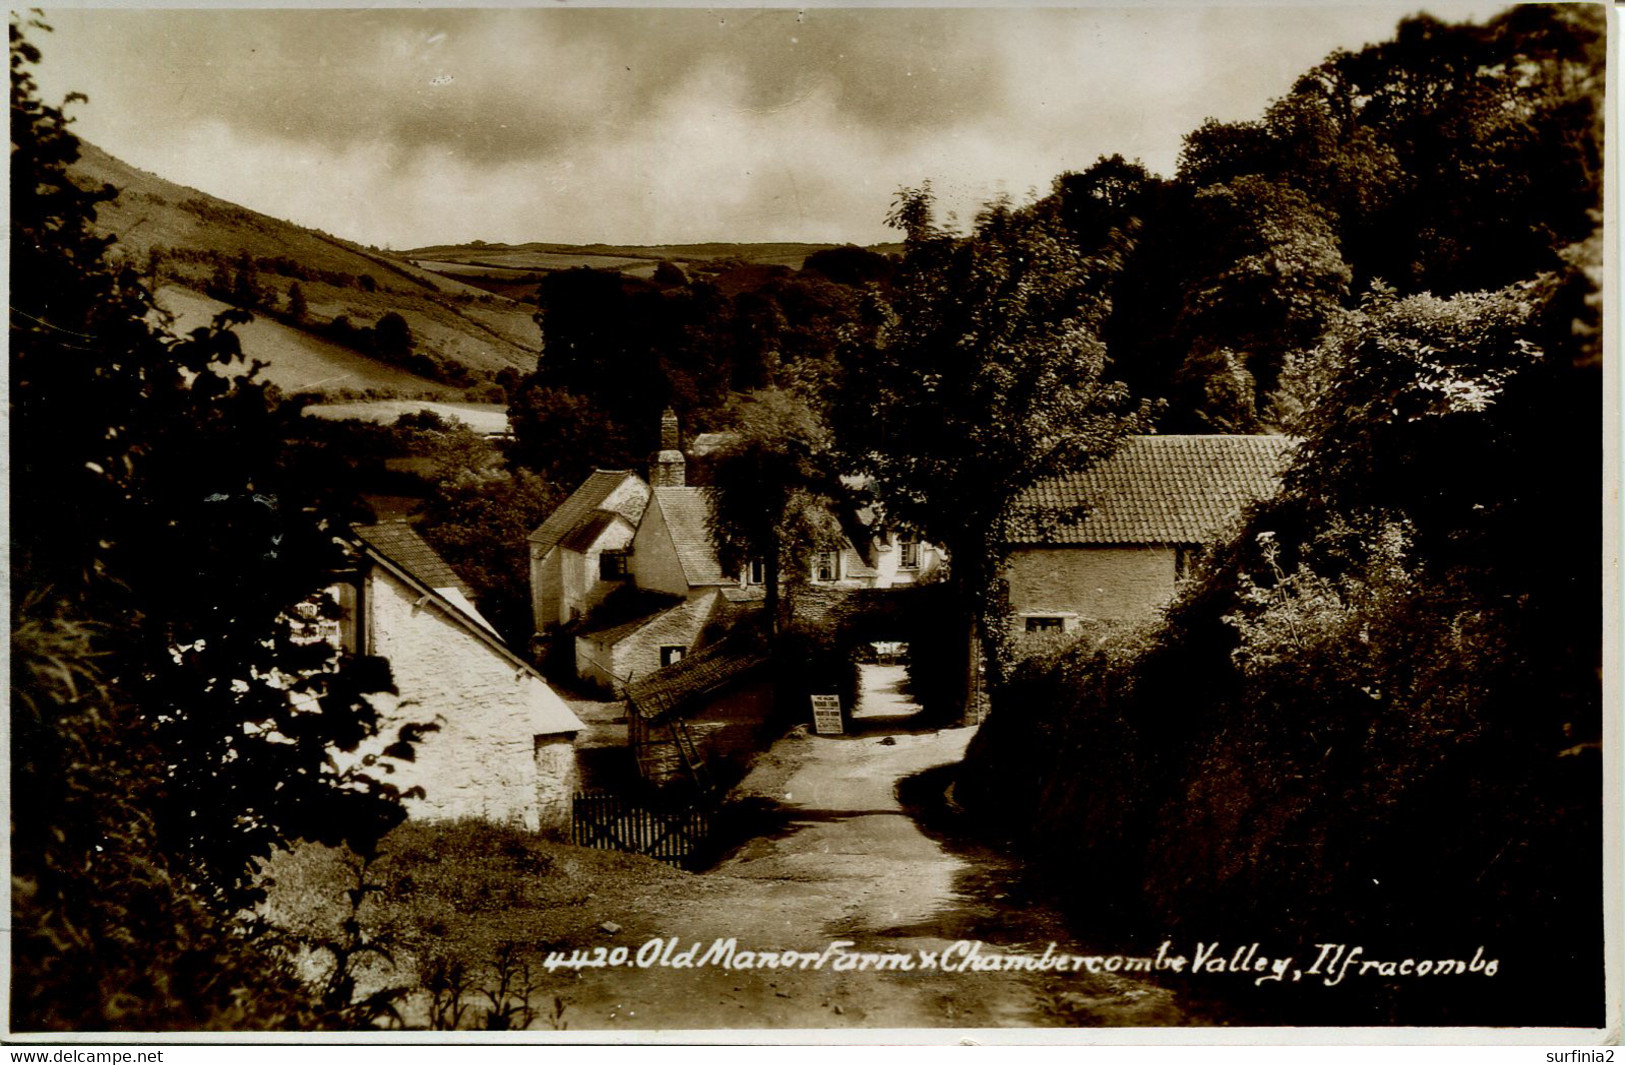 DEVON - A-C OLD MANOR FARM AND CHAMBERCOMBE VALLEY RP Dv1166 - Ilfracombe